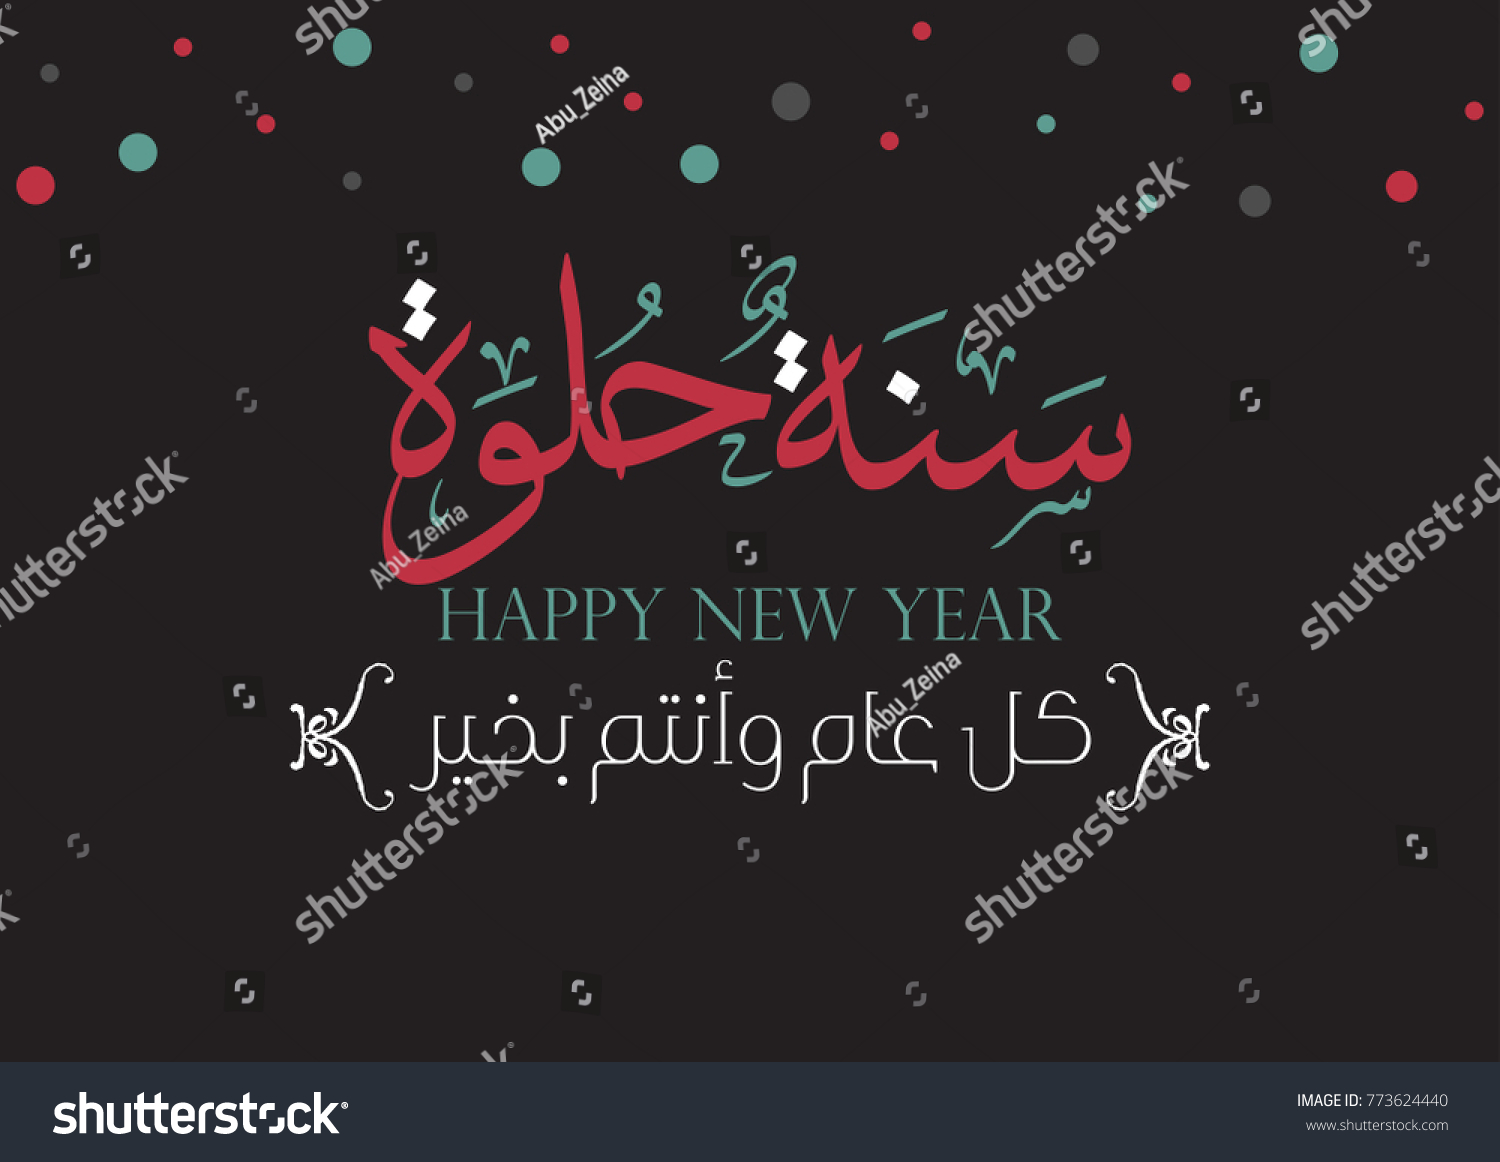 Happy New Year Arabic Calligraphy Greeting Stock Vector (Royalty Free